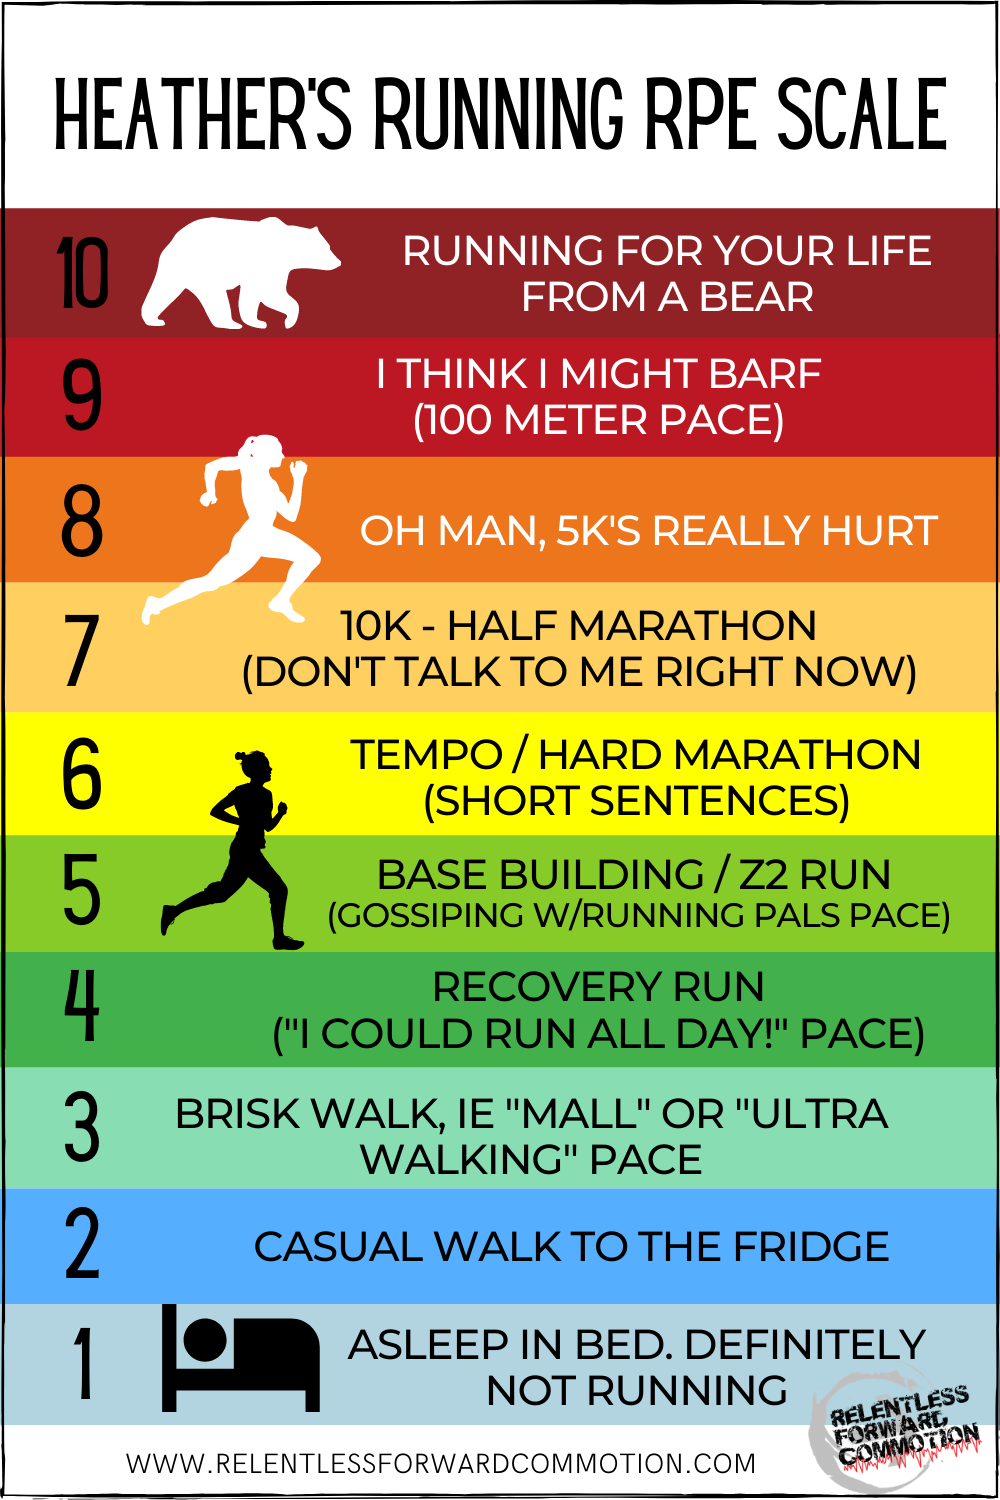 running-by-heart-rate-rpe-or-pace-which-training-method-should-i